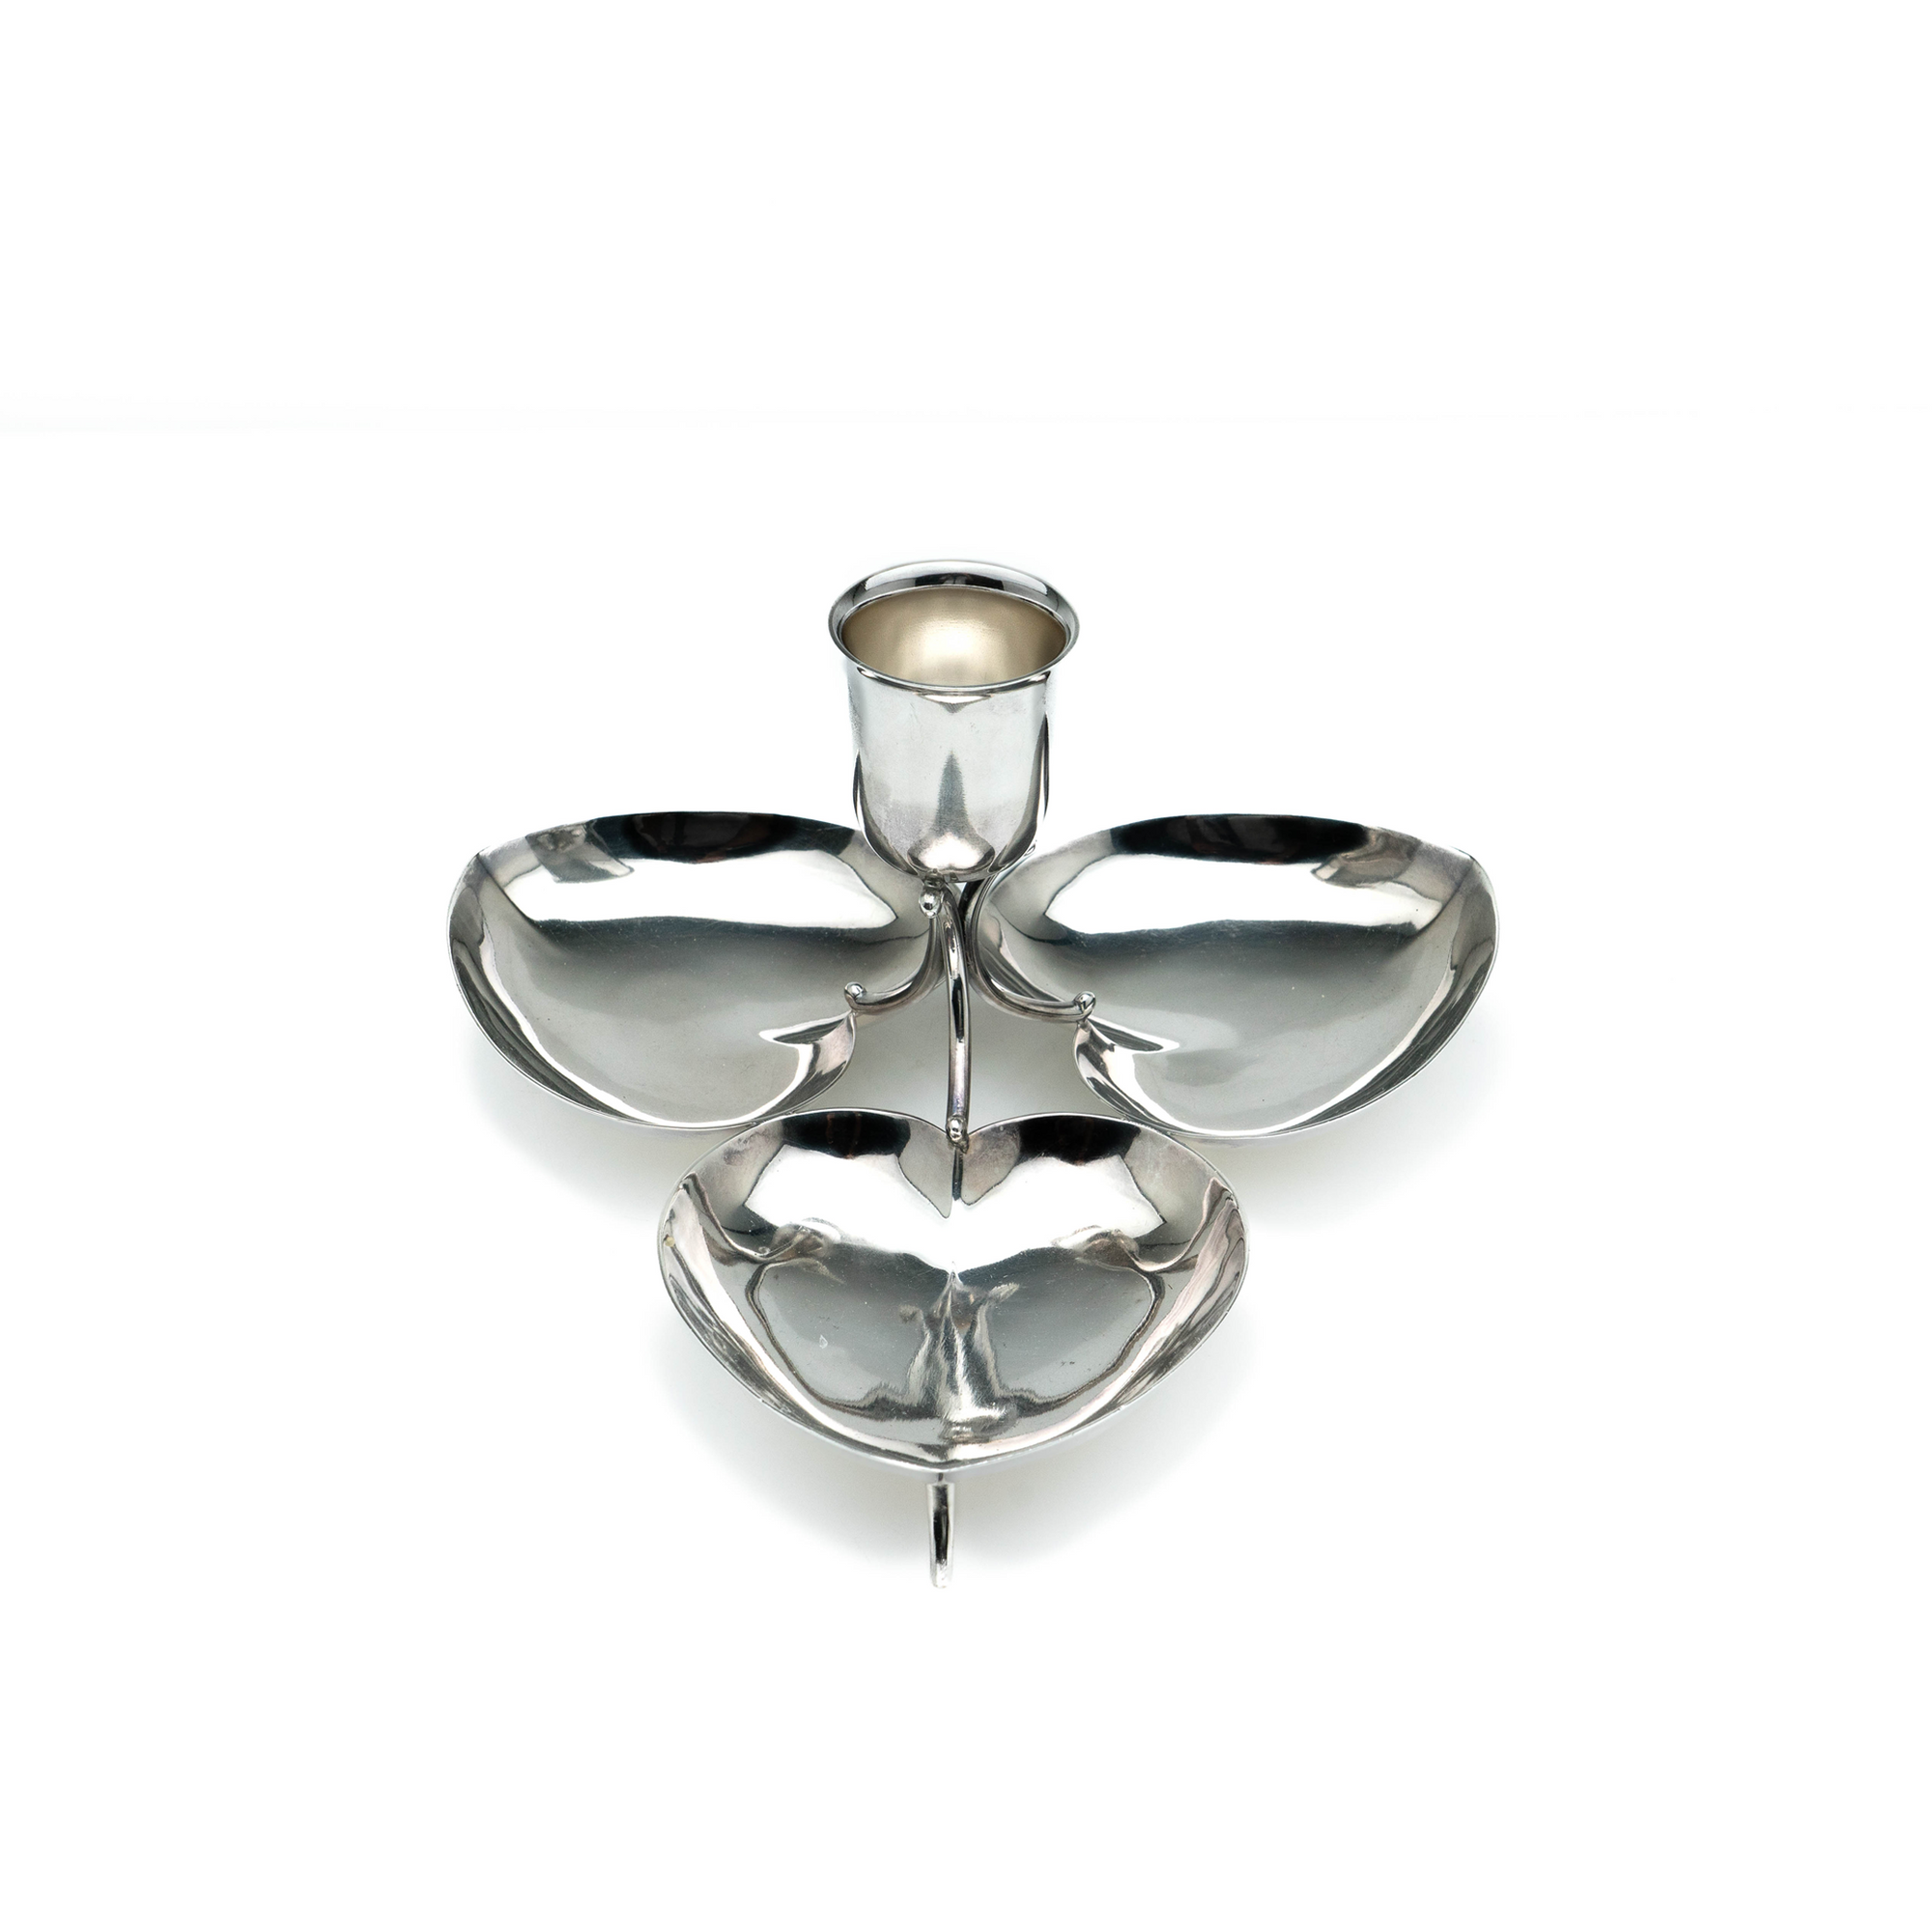 Christian Dior Catchall/Candle Holder